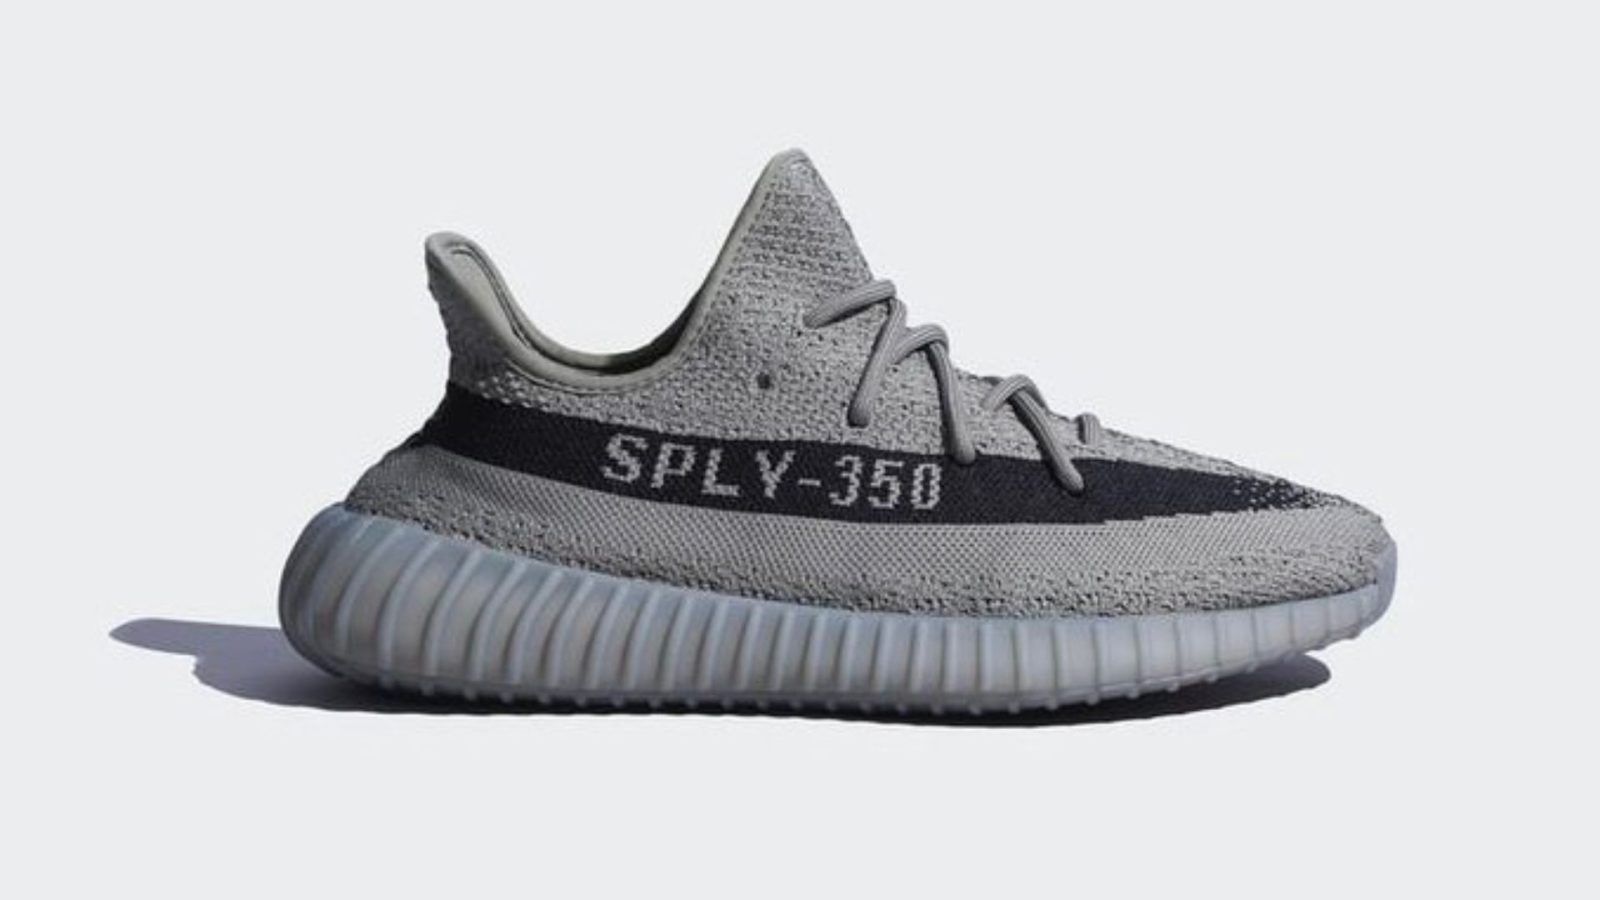 Adidas is unbranded YEEZY V2 without Ye branding